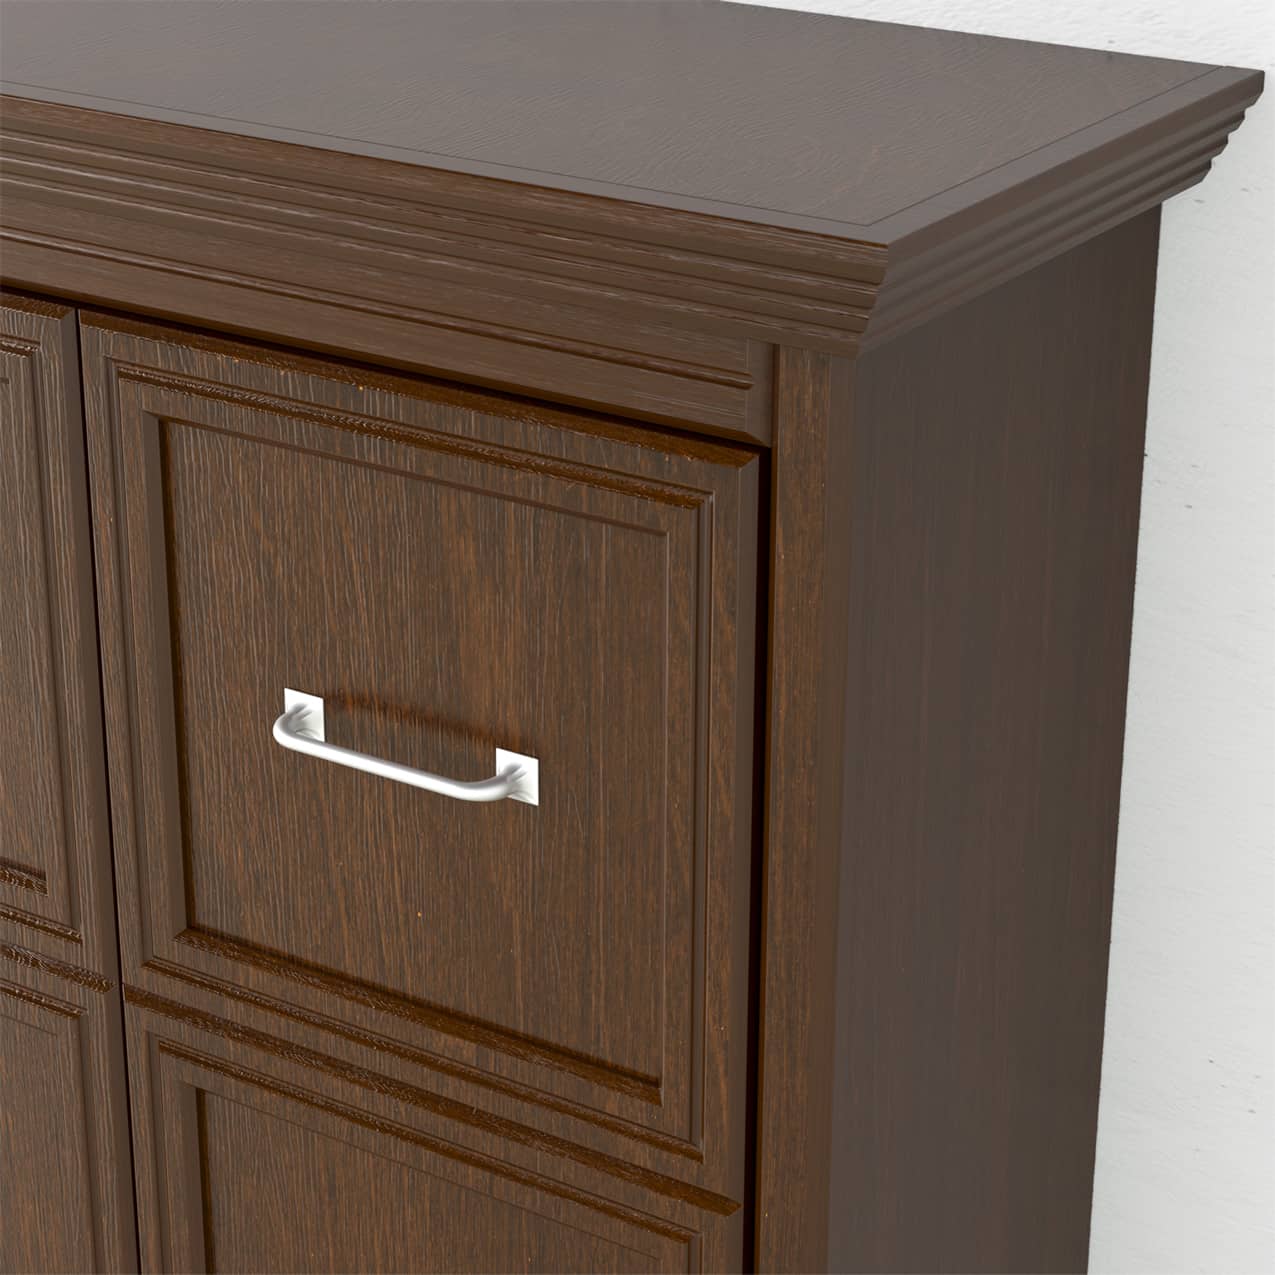 closeup of the chamberlin full murphy bed solid wood top molding and brushed aluminum hardware hidden hideawy hide away hide-a-way diy murphy bed kit fold out pull down wall bed cabinet guest bed